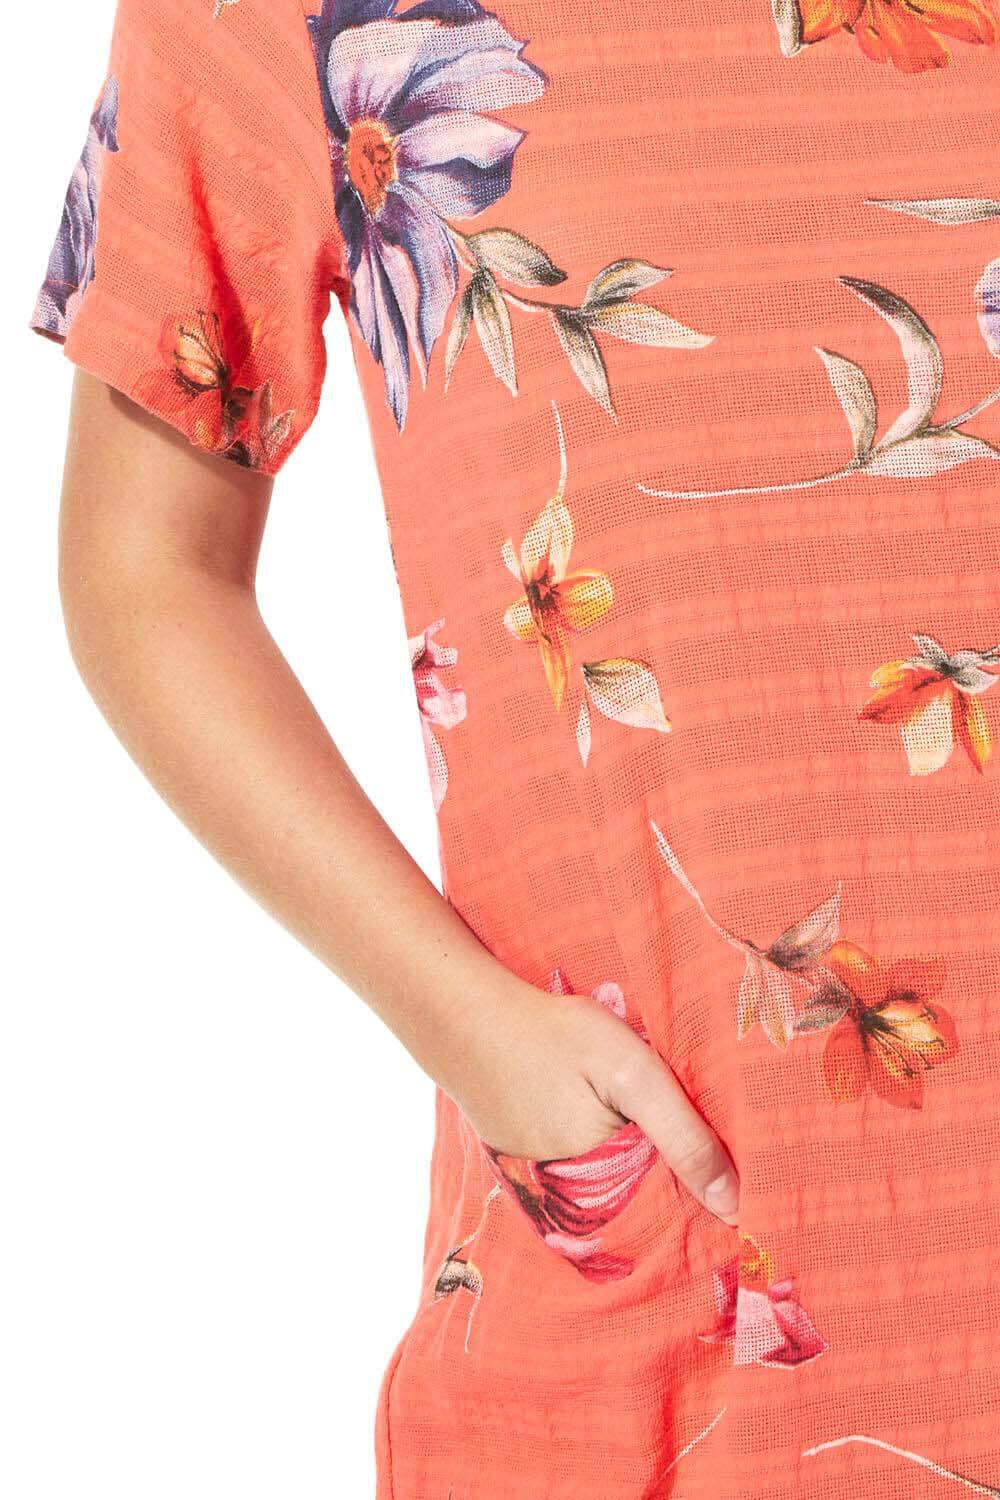 CORAL Floral Textured Cotton Cocoon Dress, Image 4 of 5